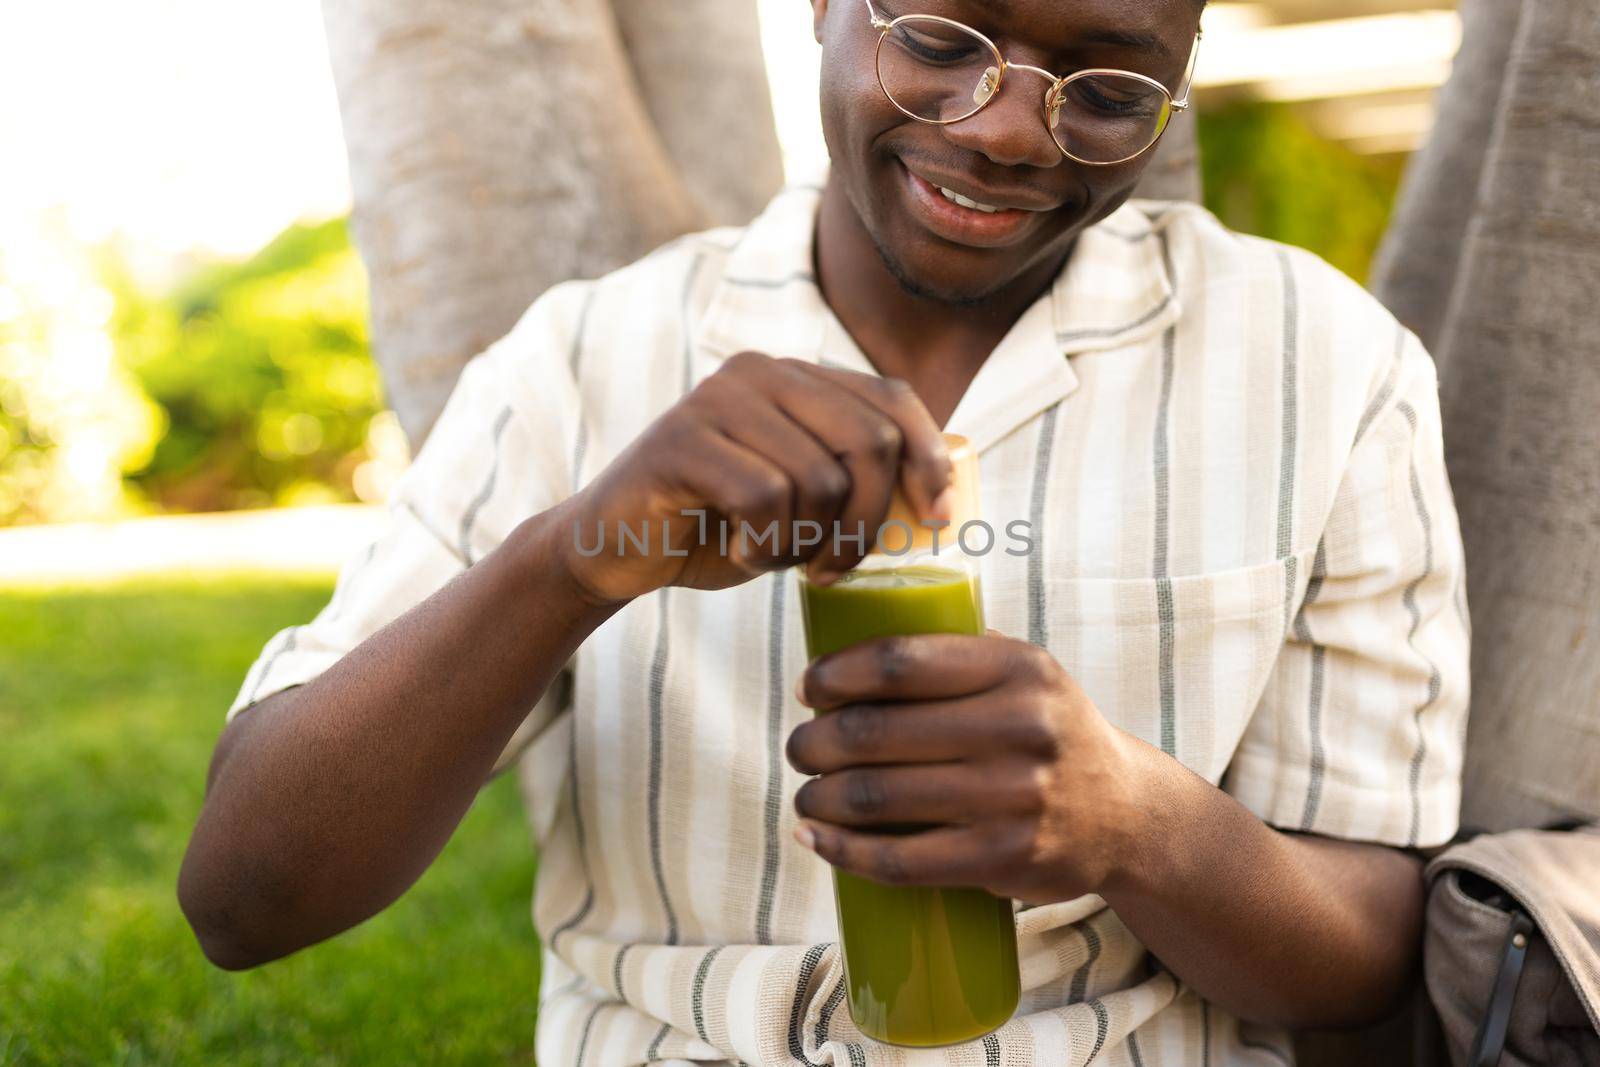 Young black man opening glass bottle of green juice outdoors. Healthy lifestyle.